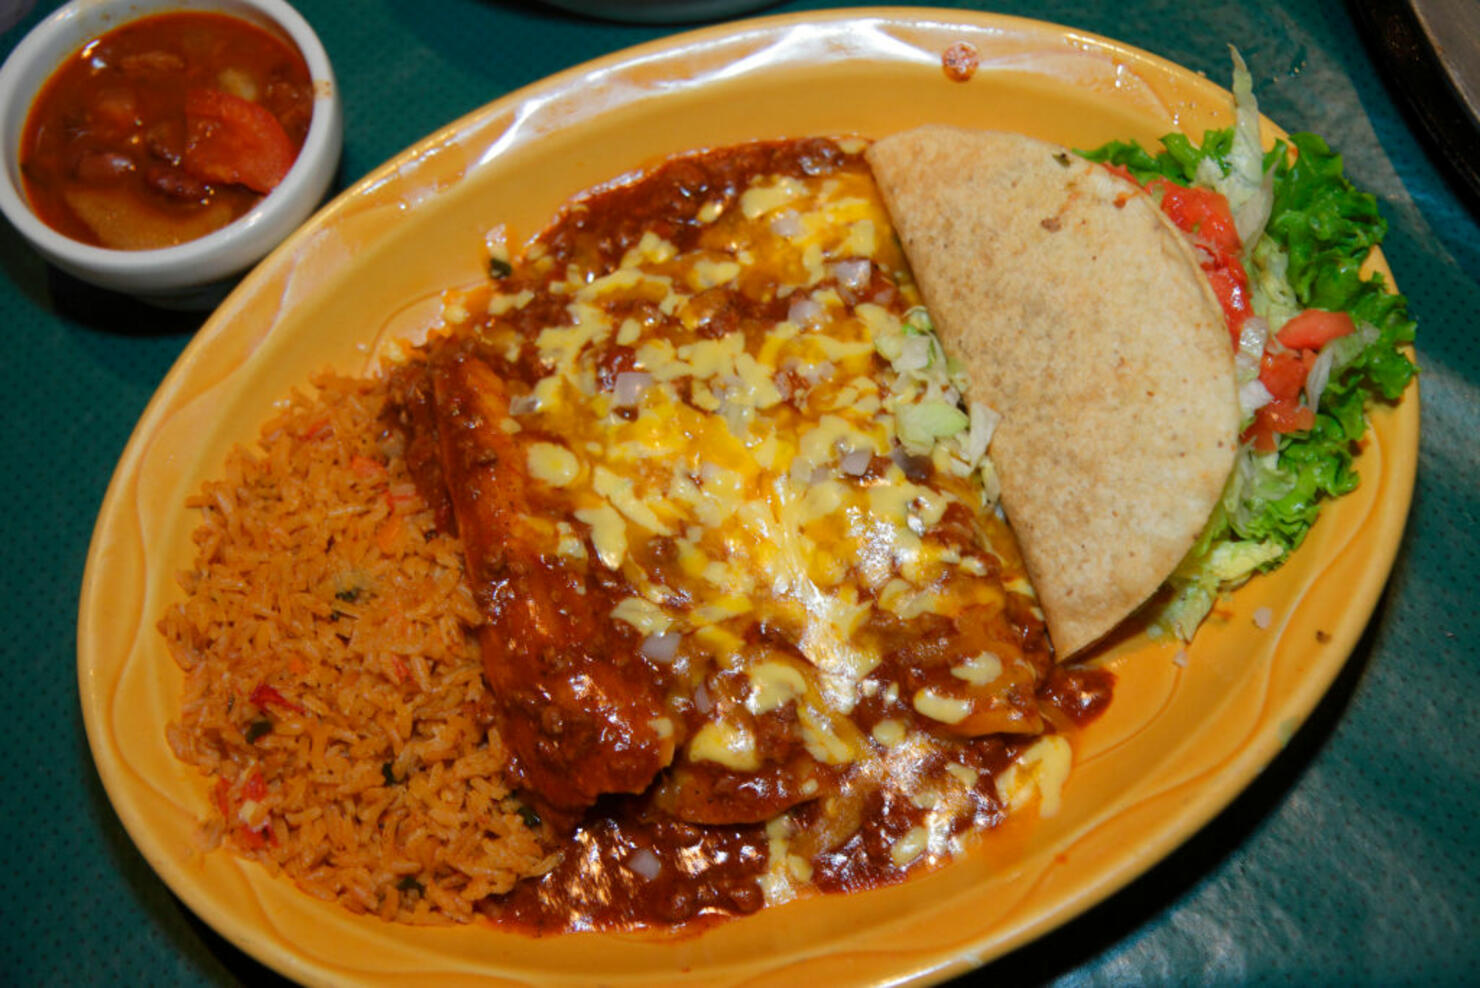 A plate of food from Uncle Julio's Fine Mexican Food.